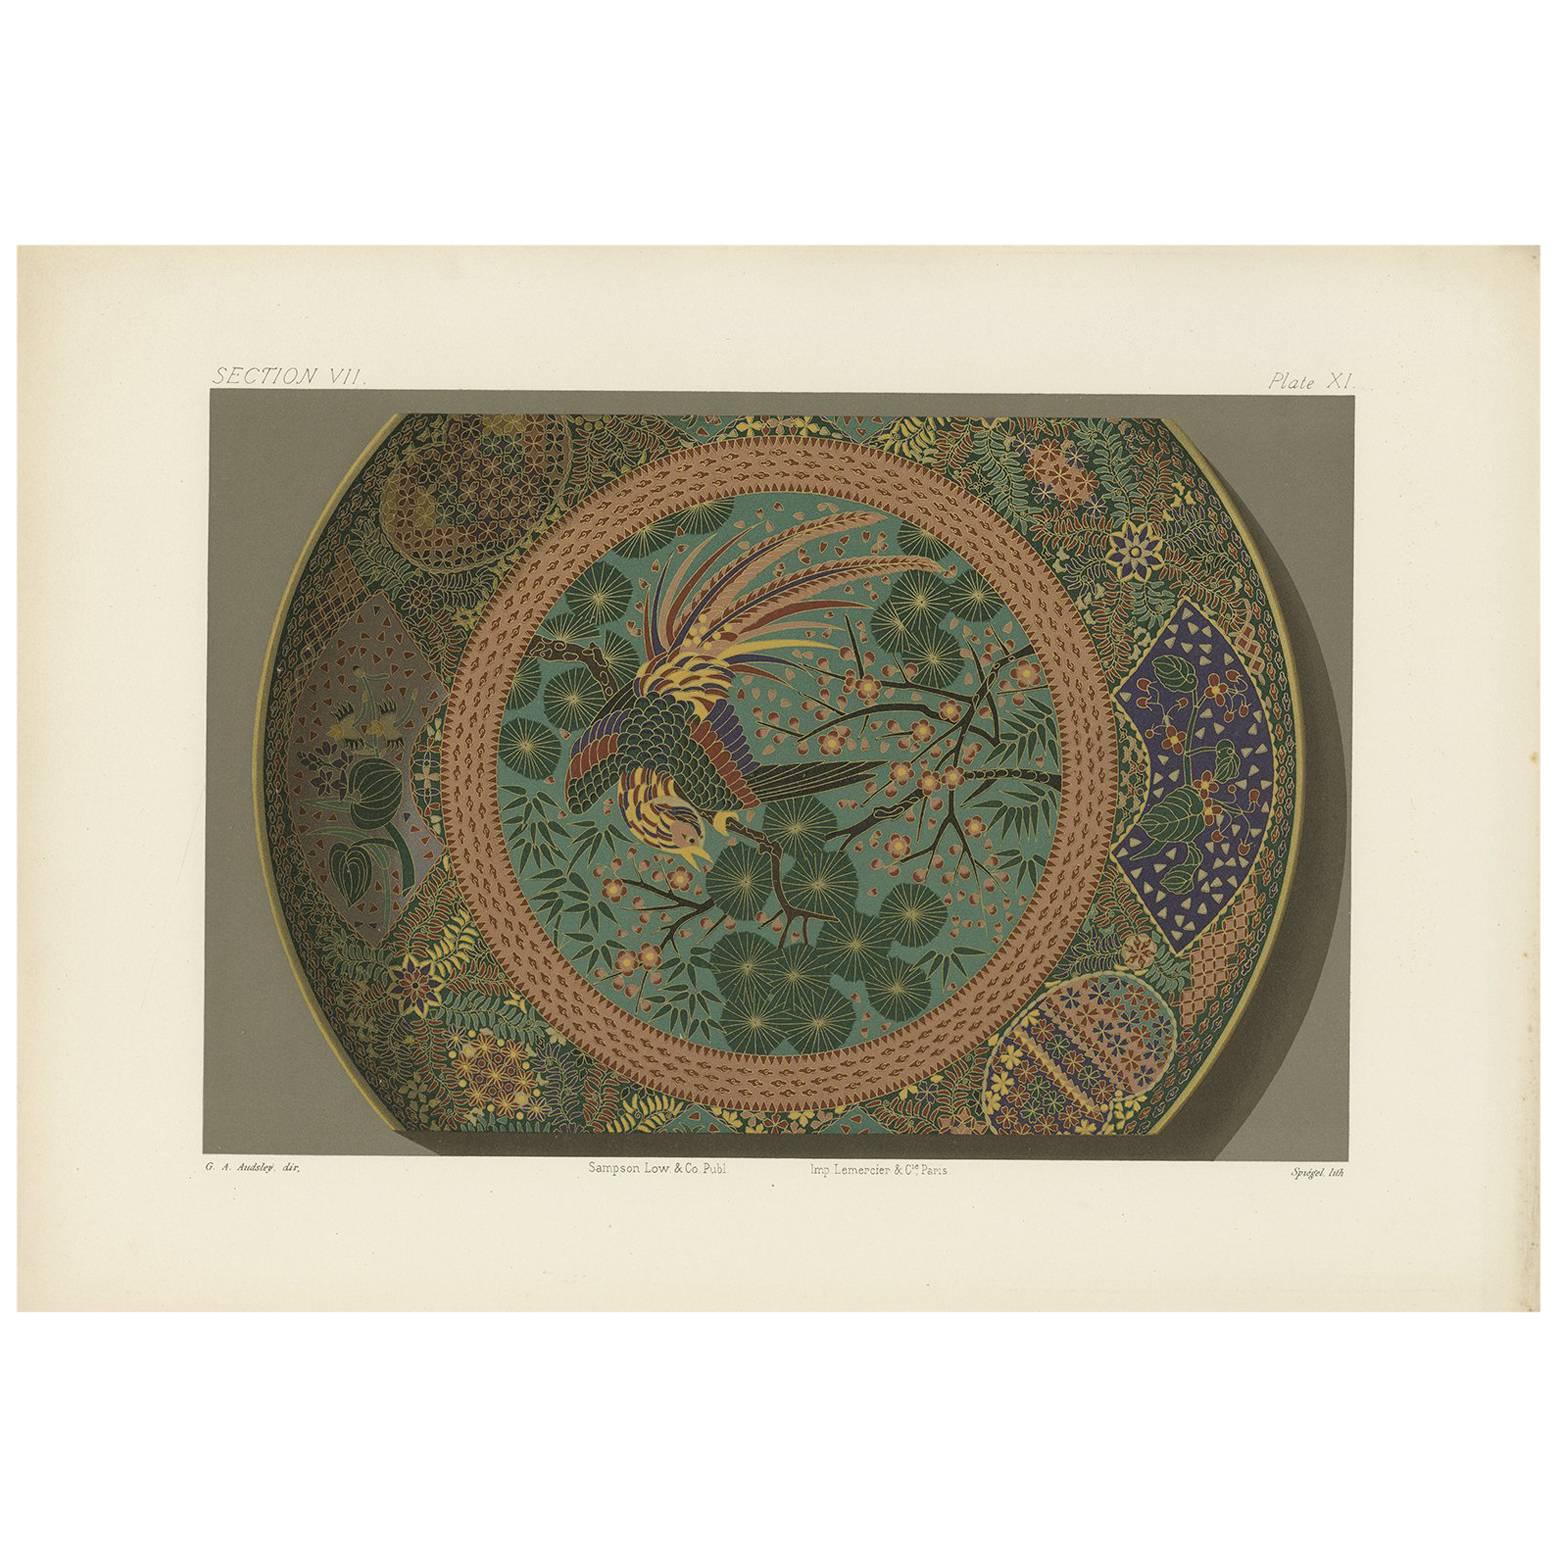 Antique Print of a Sara 'Japanese Dish II' by G. Audsley, 1884